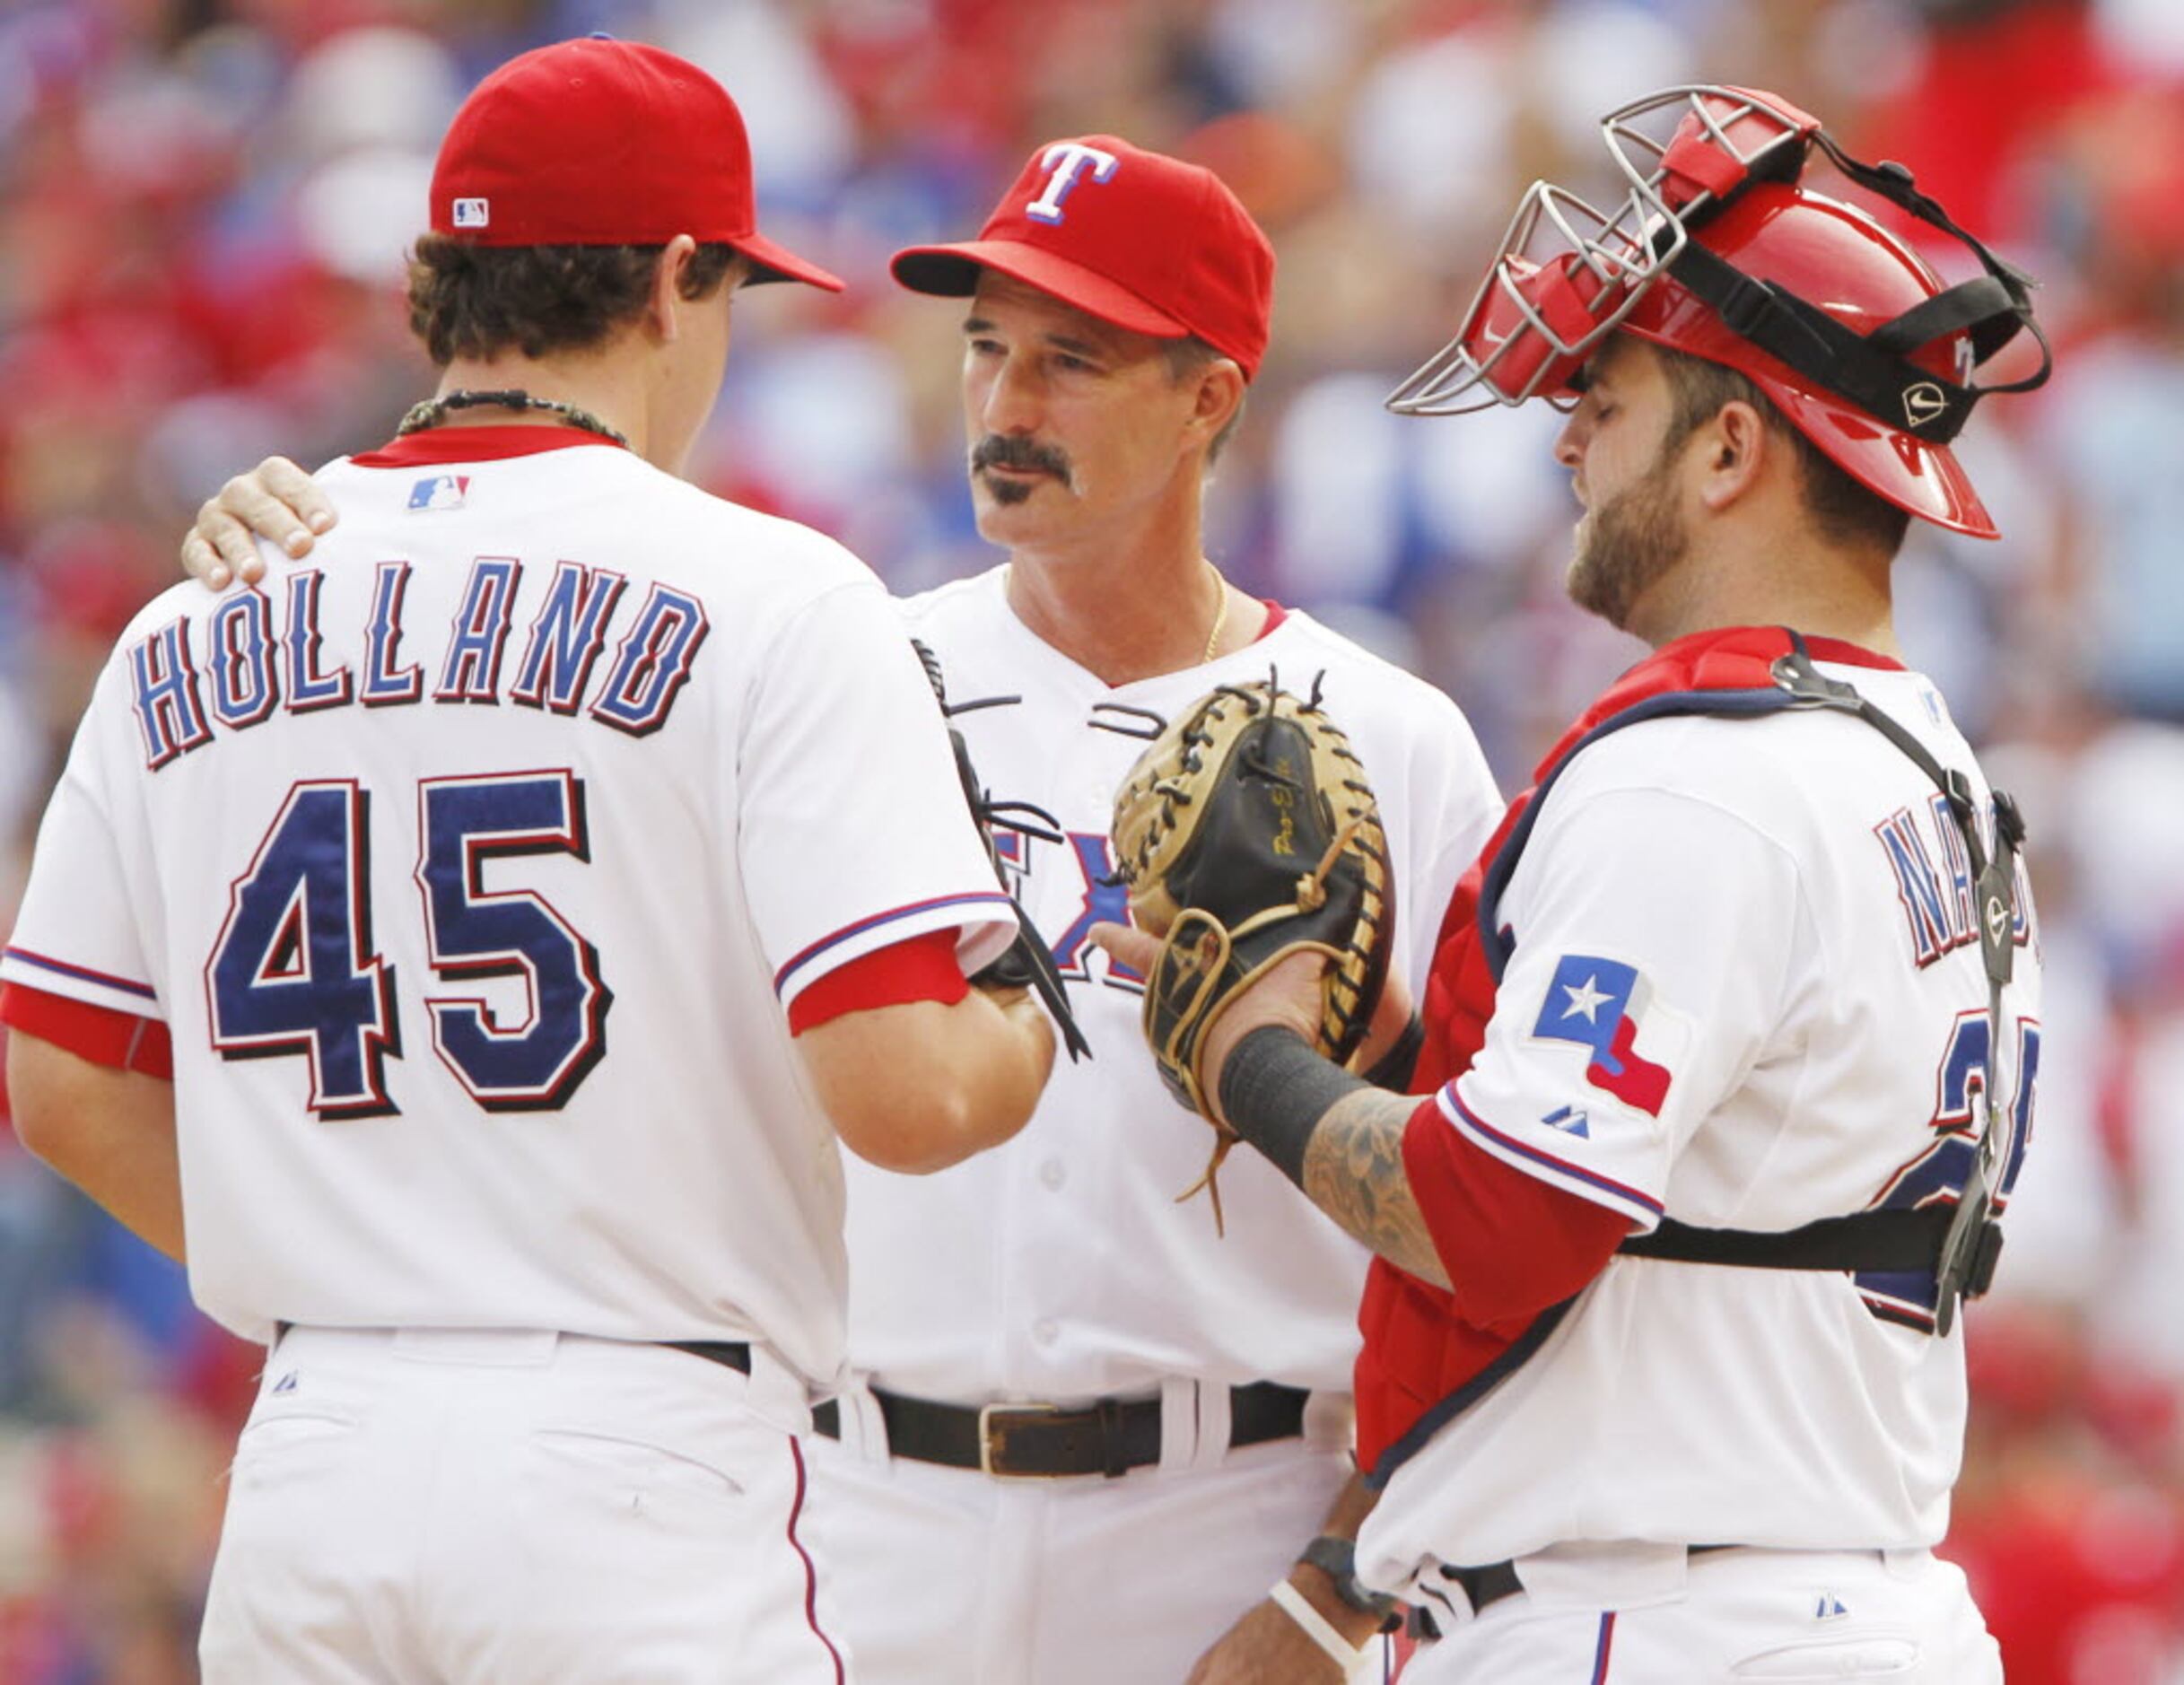 Texas Rangers hire Mike Maddux as pitching coach, ex-Royals GM